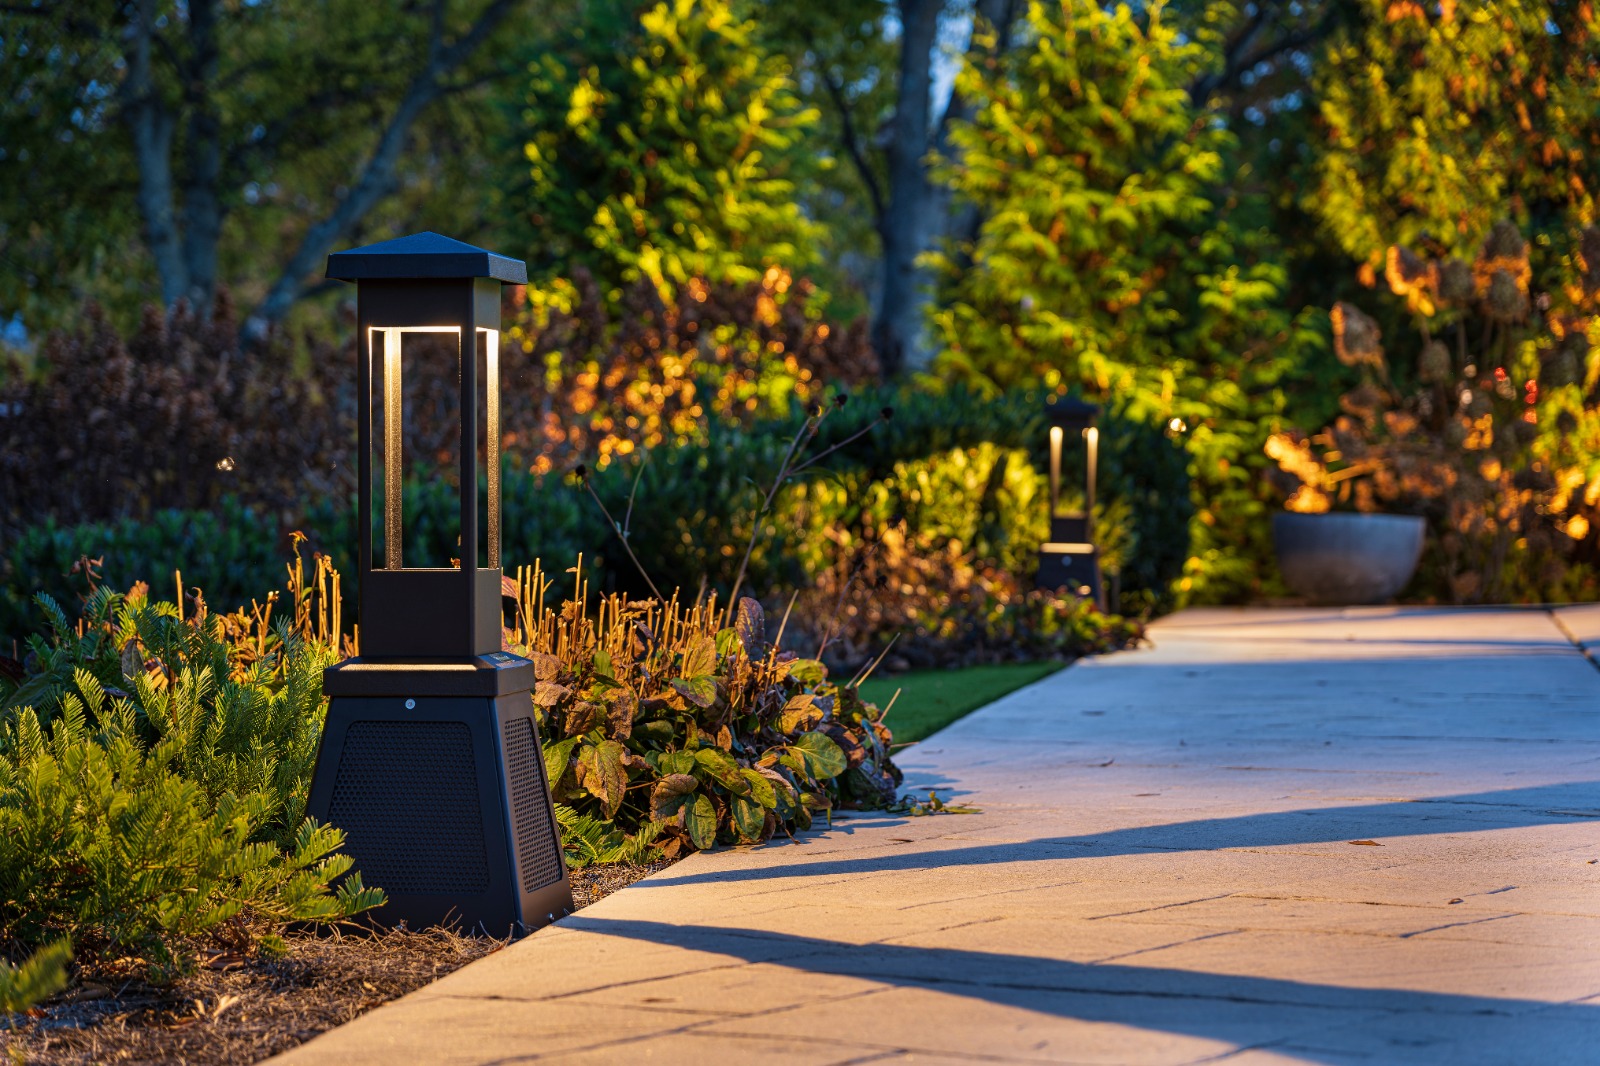 The Lighthouse Outdoor Lighting and Audio approach to projects and working with clients